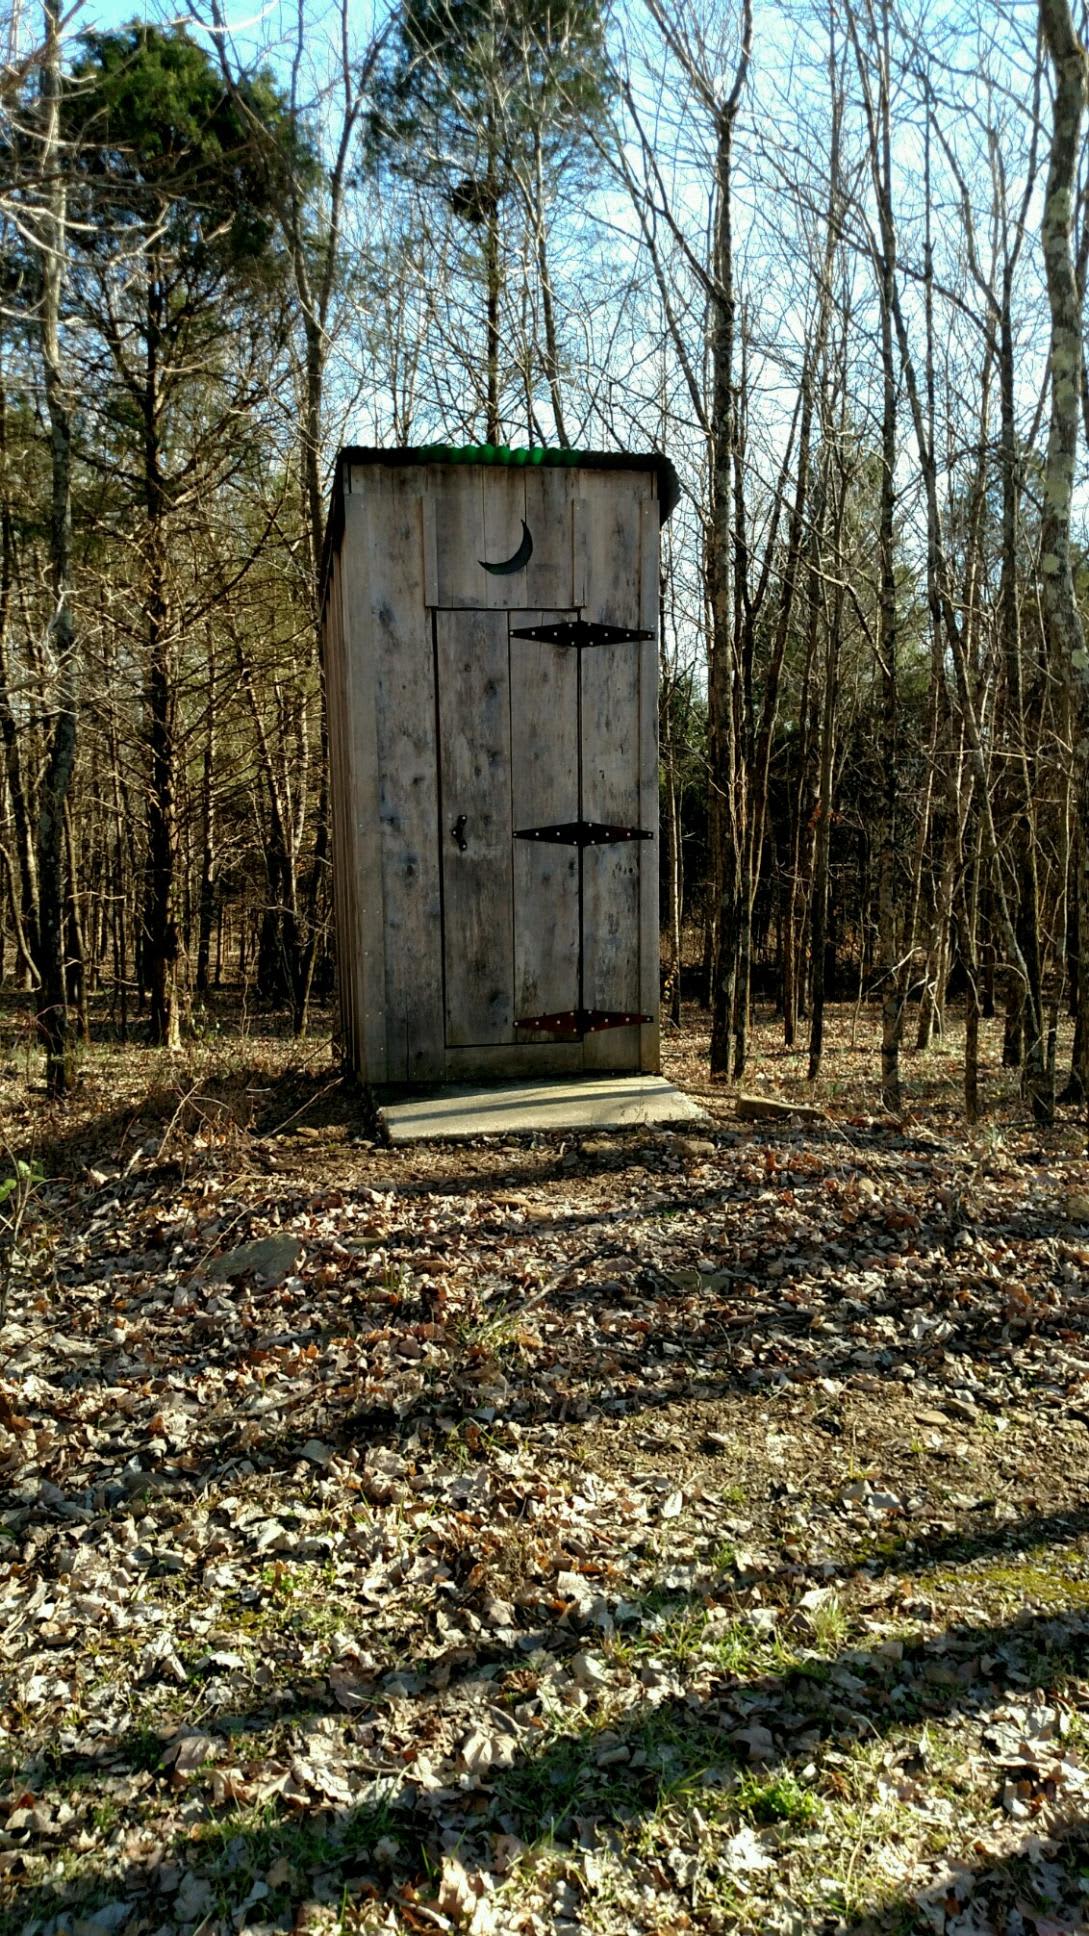 The Outhouse at Durbin's Barn.